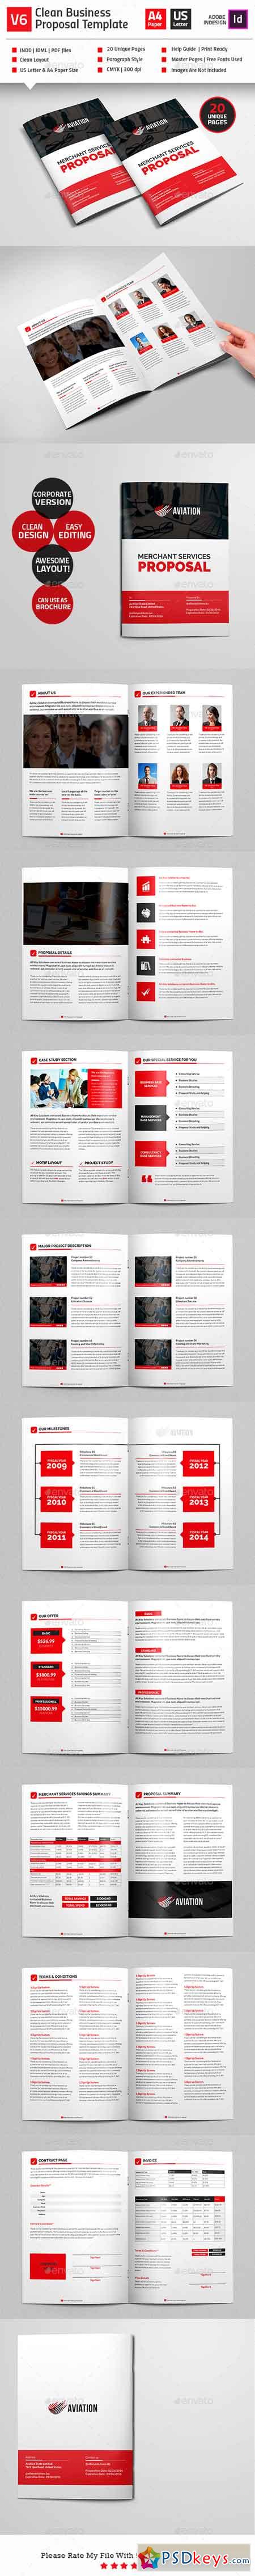 Clean Business Proposal Template V2 15739333